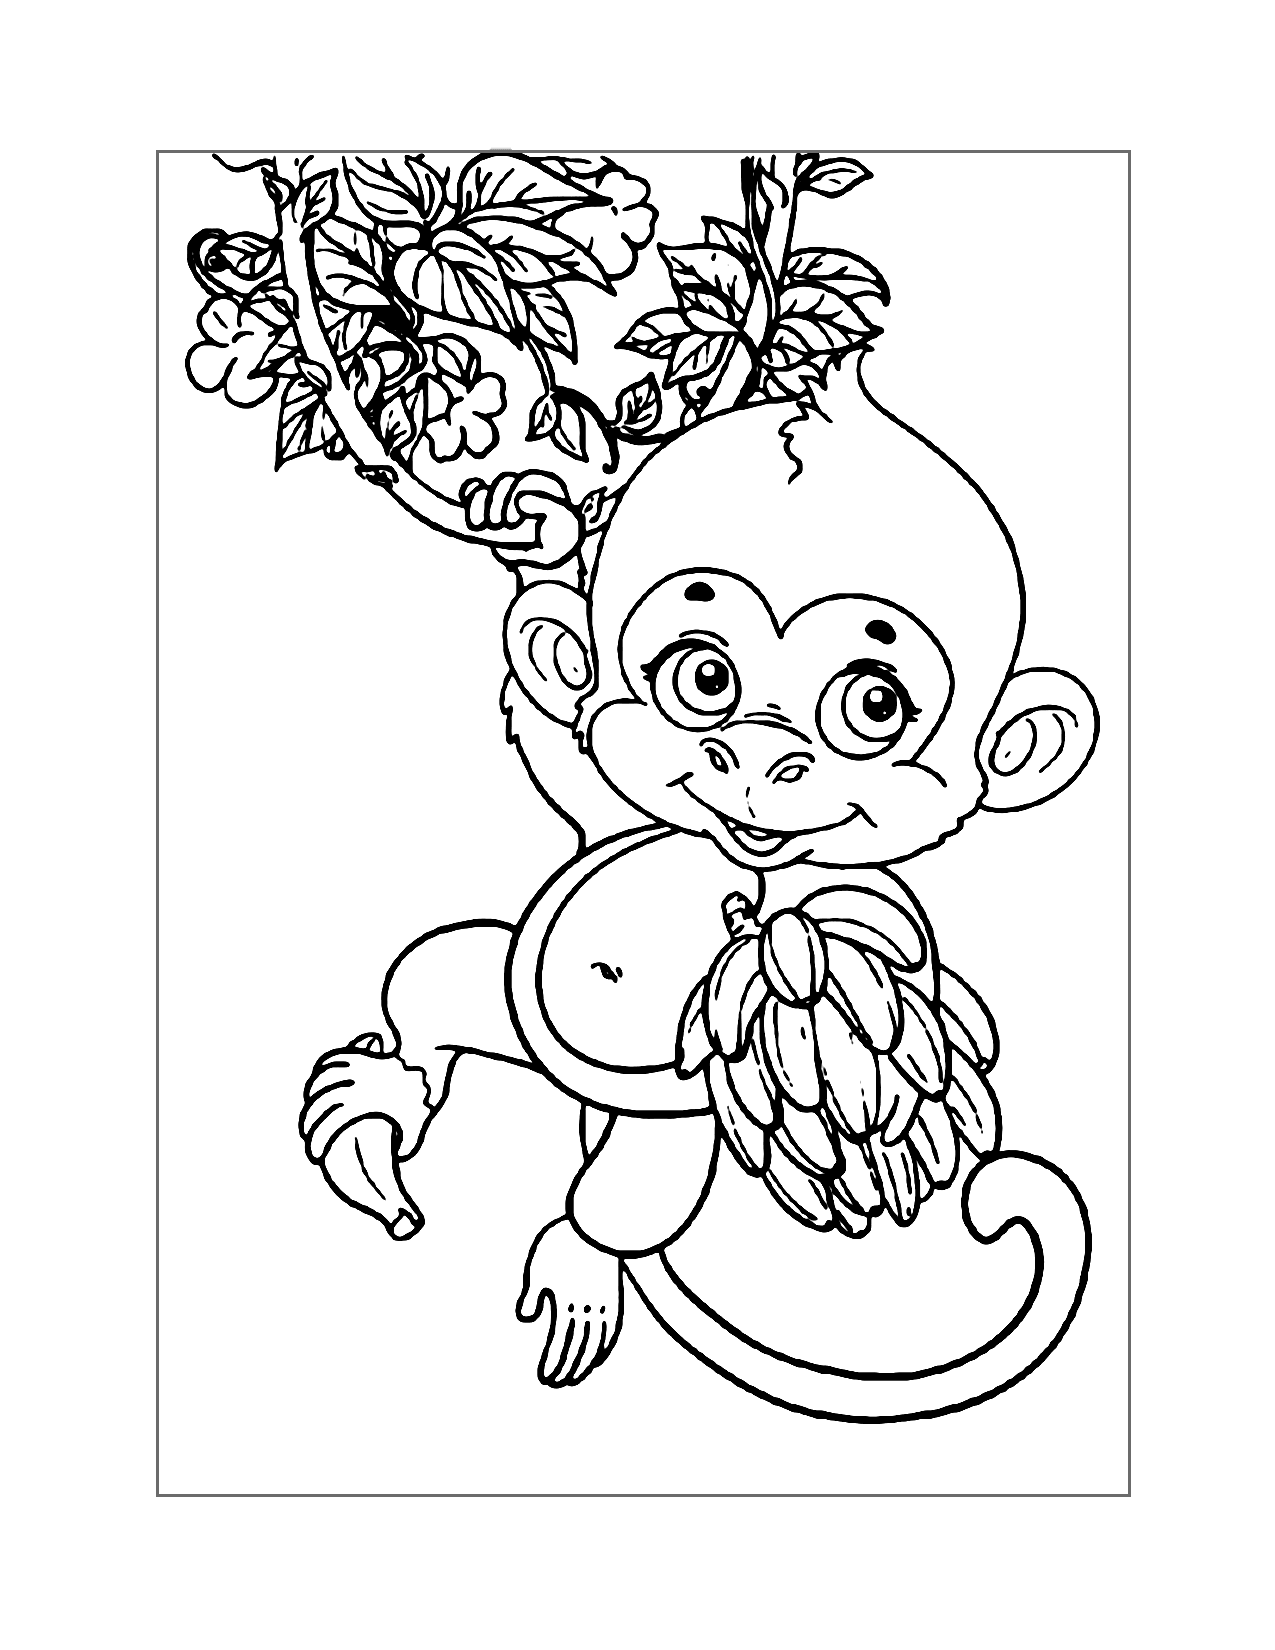 Monkey With A Bunch Of Bananas Coloring Page